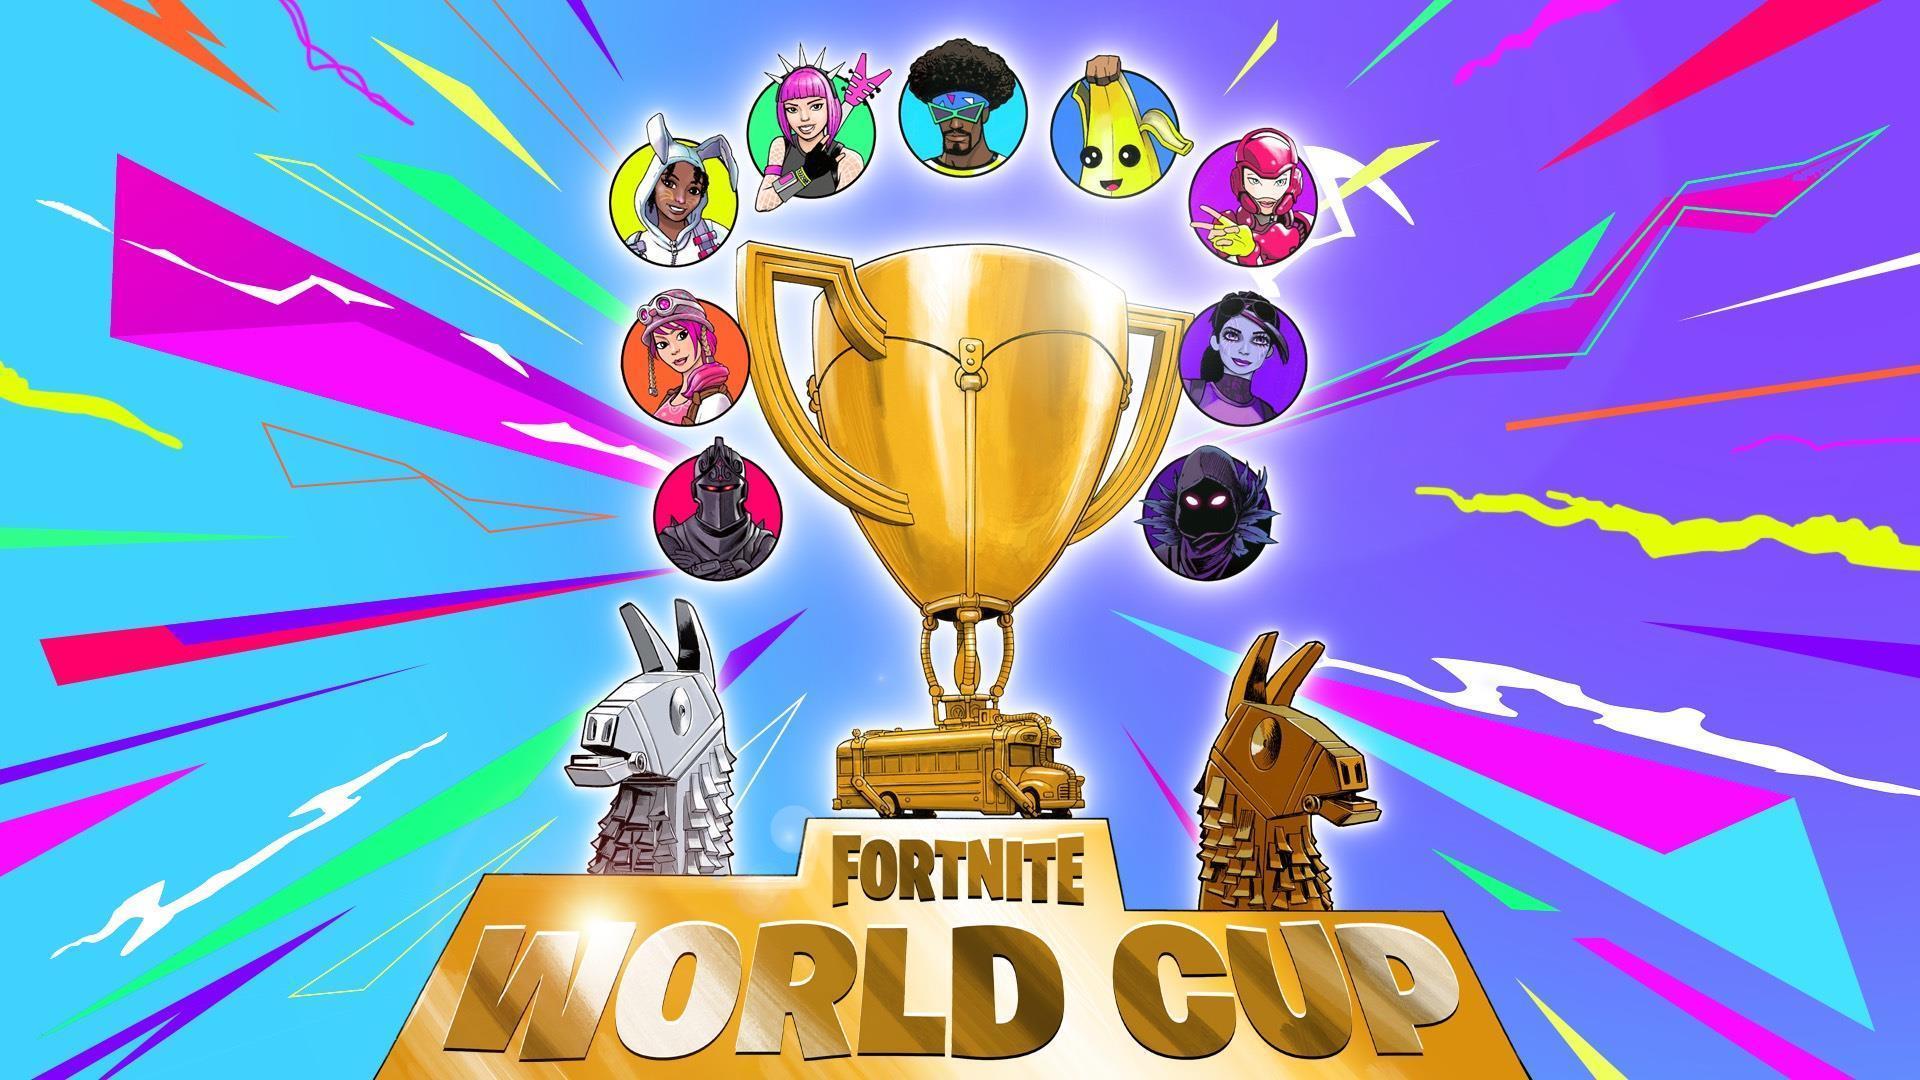 Fortnite World Cup Wallpapers Top Free Fortnite World Cup Backgrounds